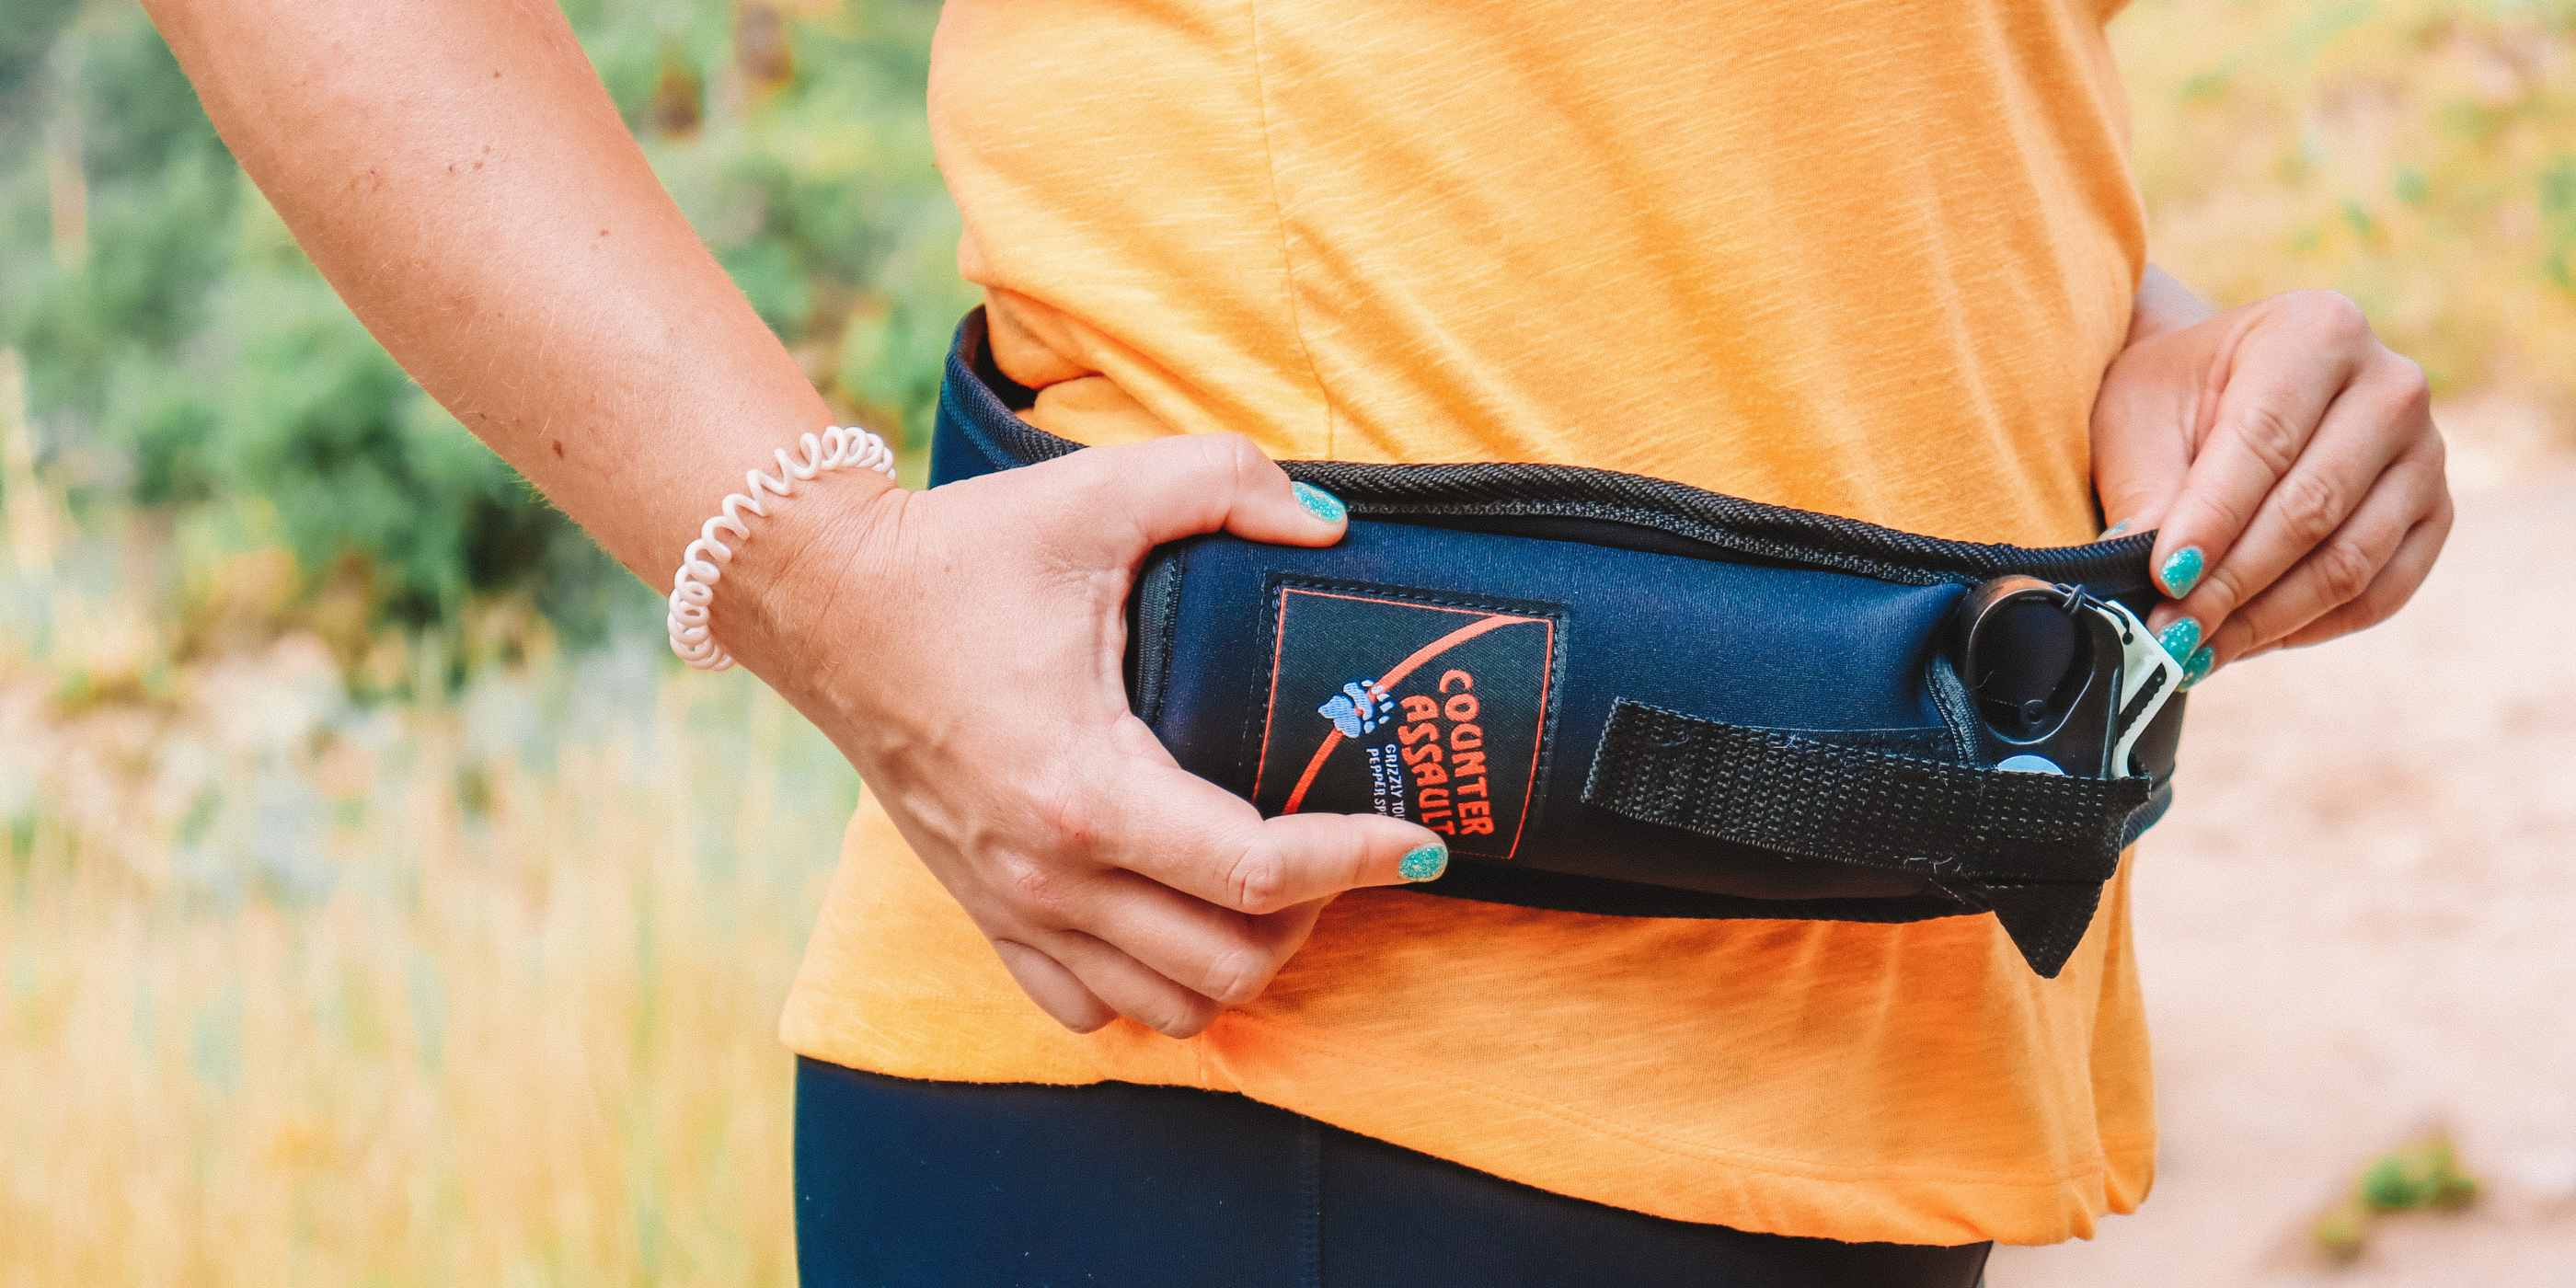 Trail Runner Holster with bear spray attached to the waist of person in orange shirt